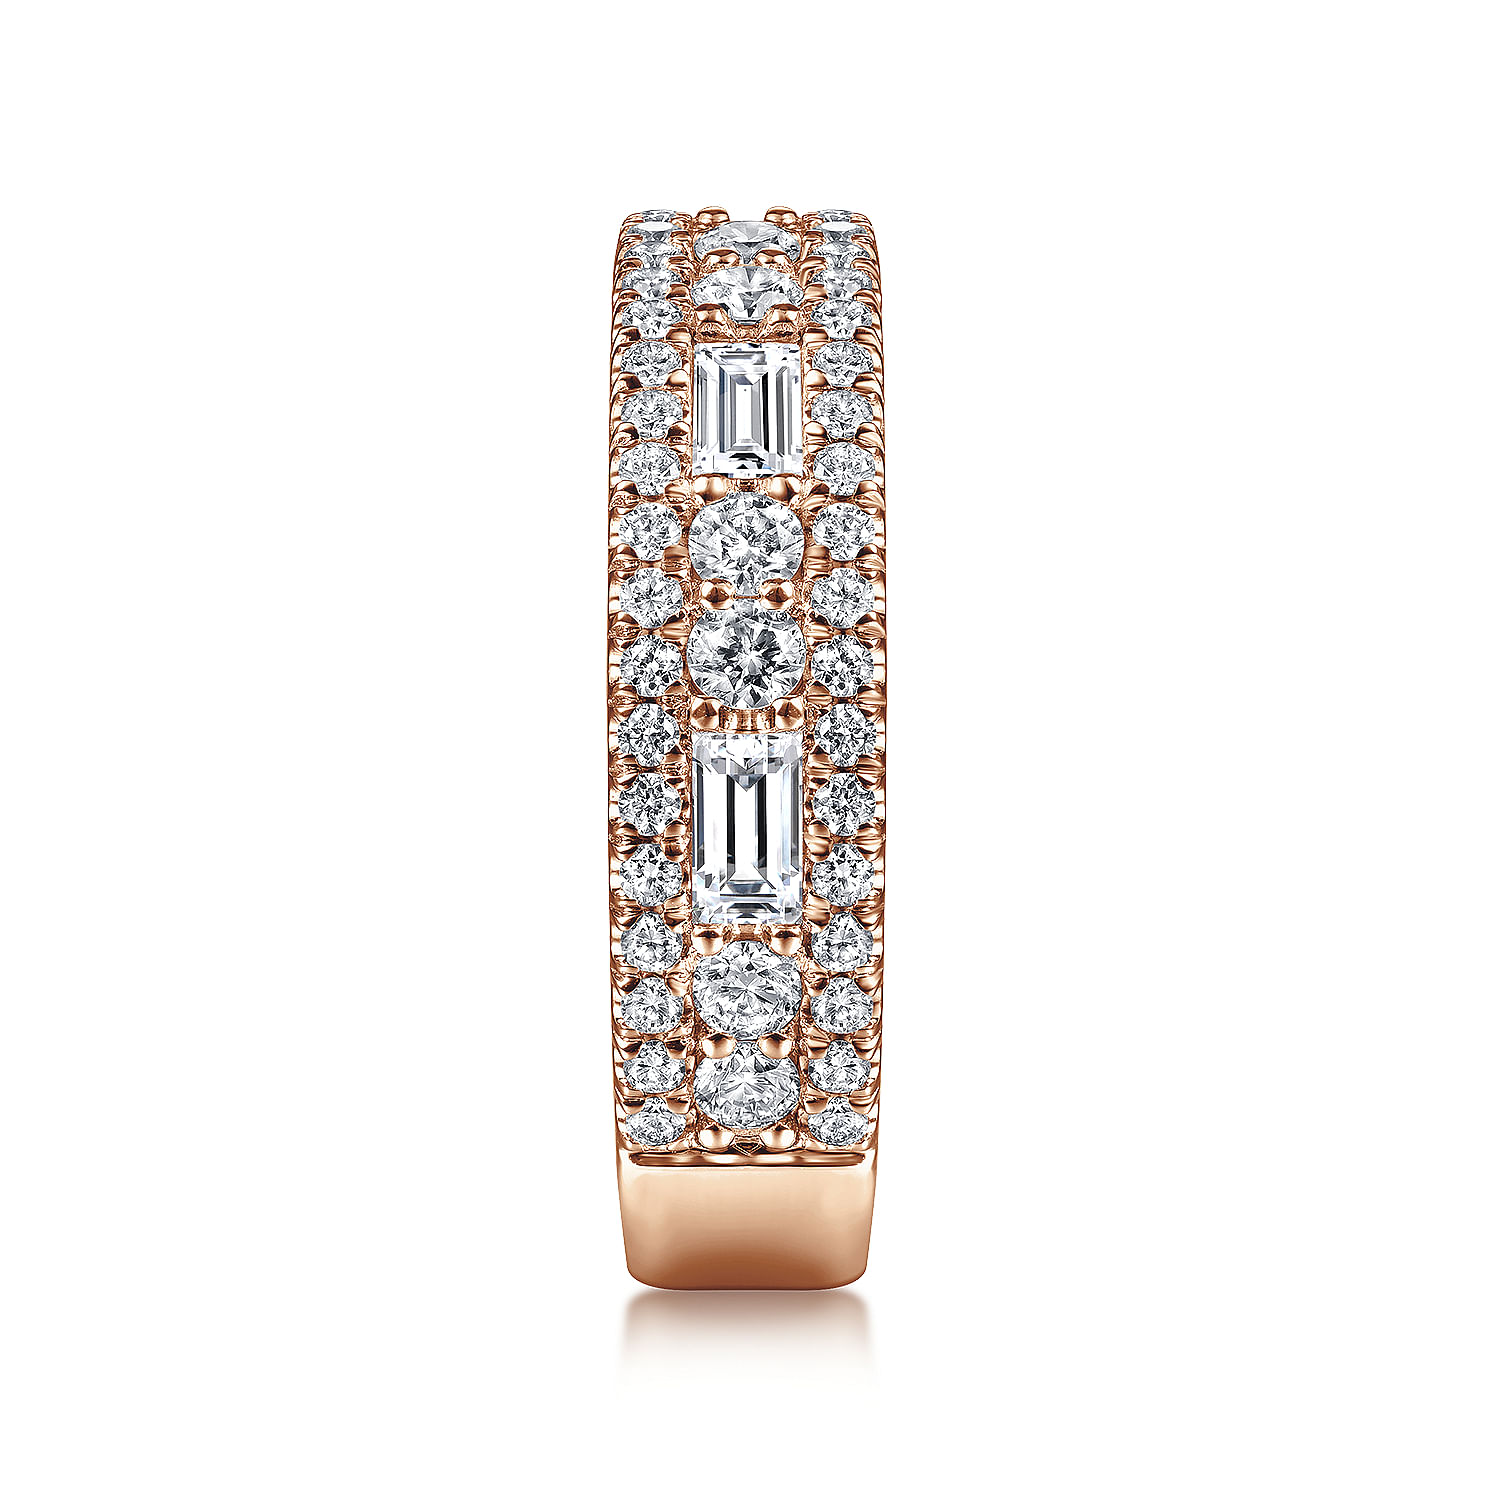 Wide 14K Rose Gold Round and Baguette Diamond Anniversary Band